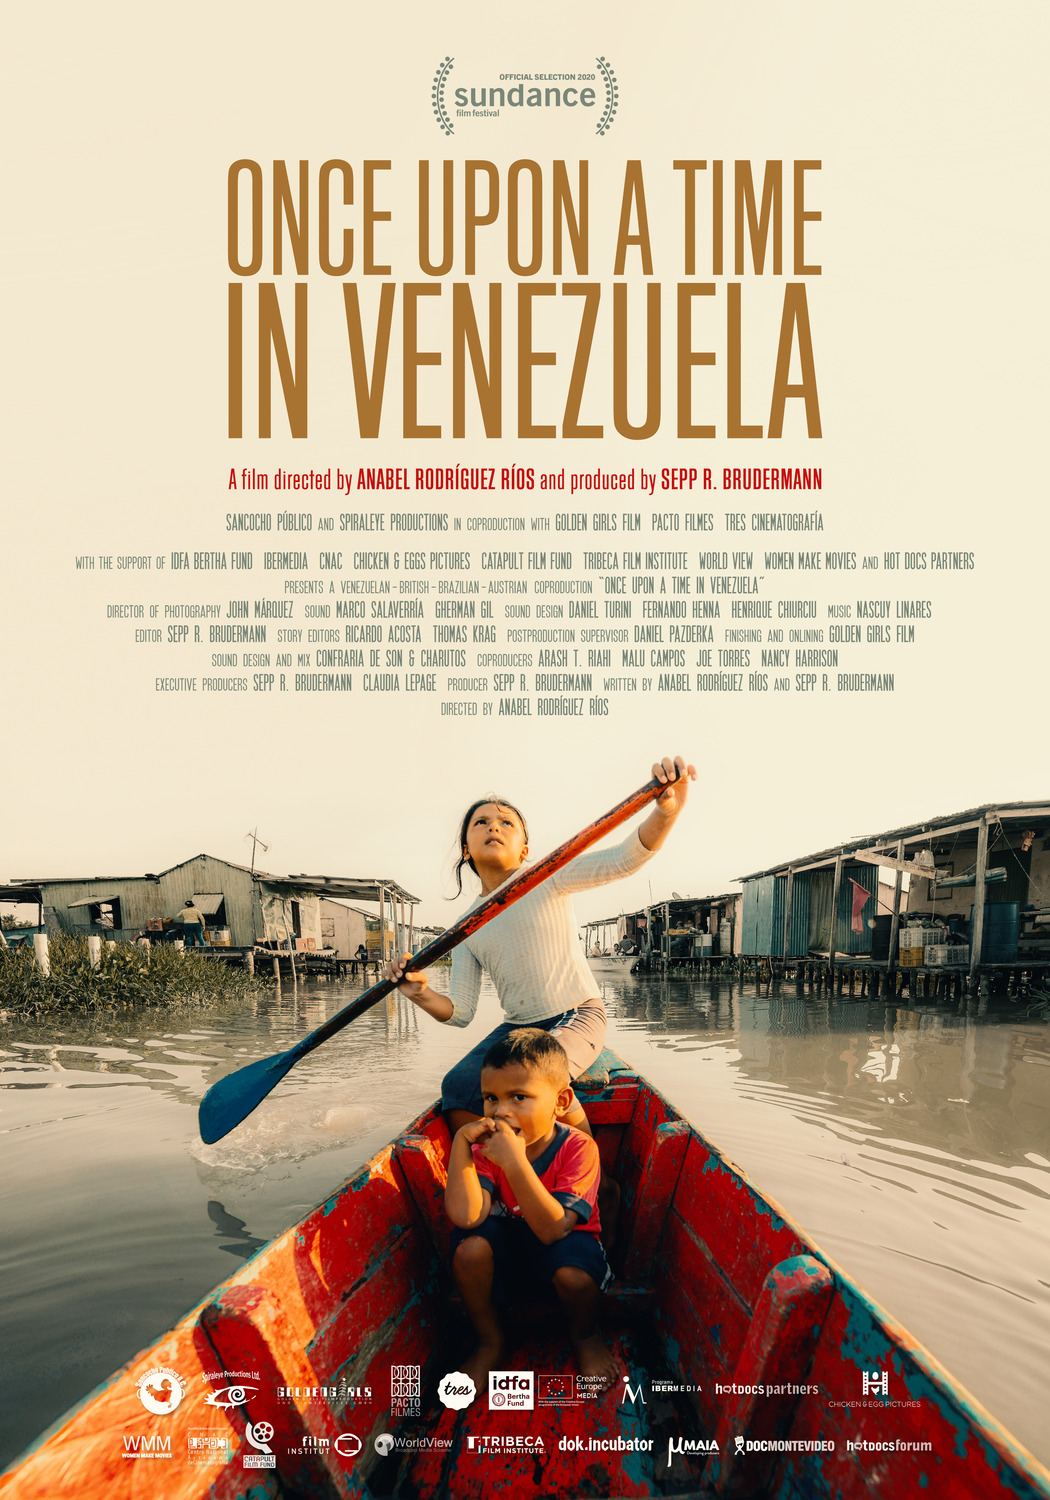 Extra Large Movie Poster Image for Once Upon a Time in Venezuela 